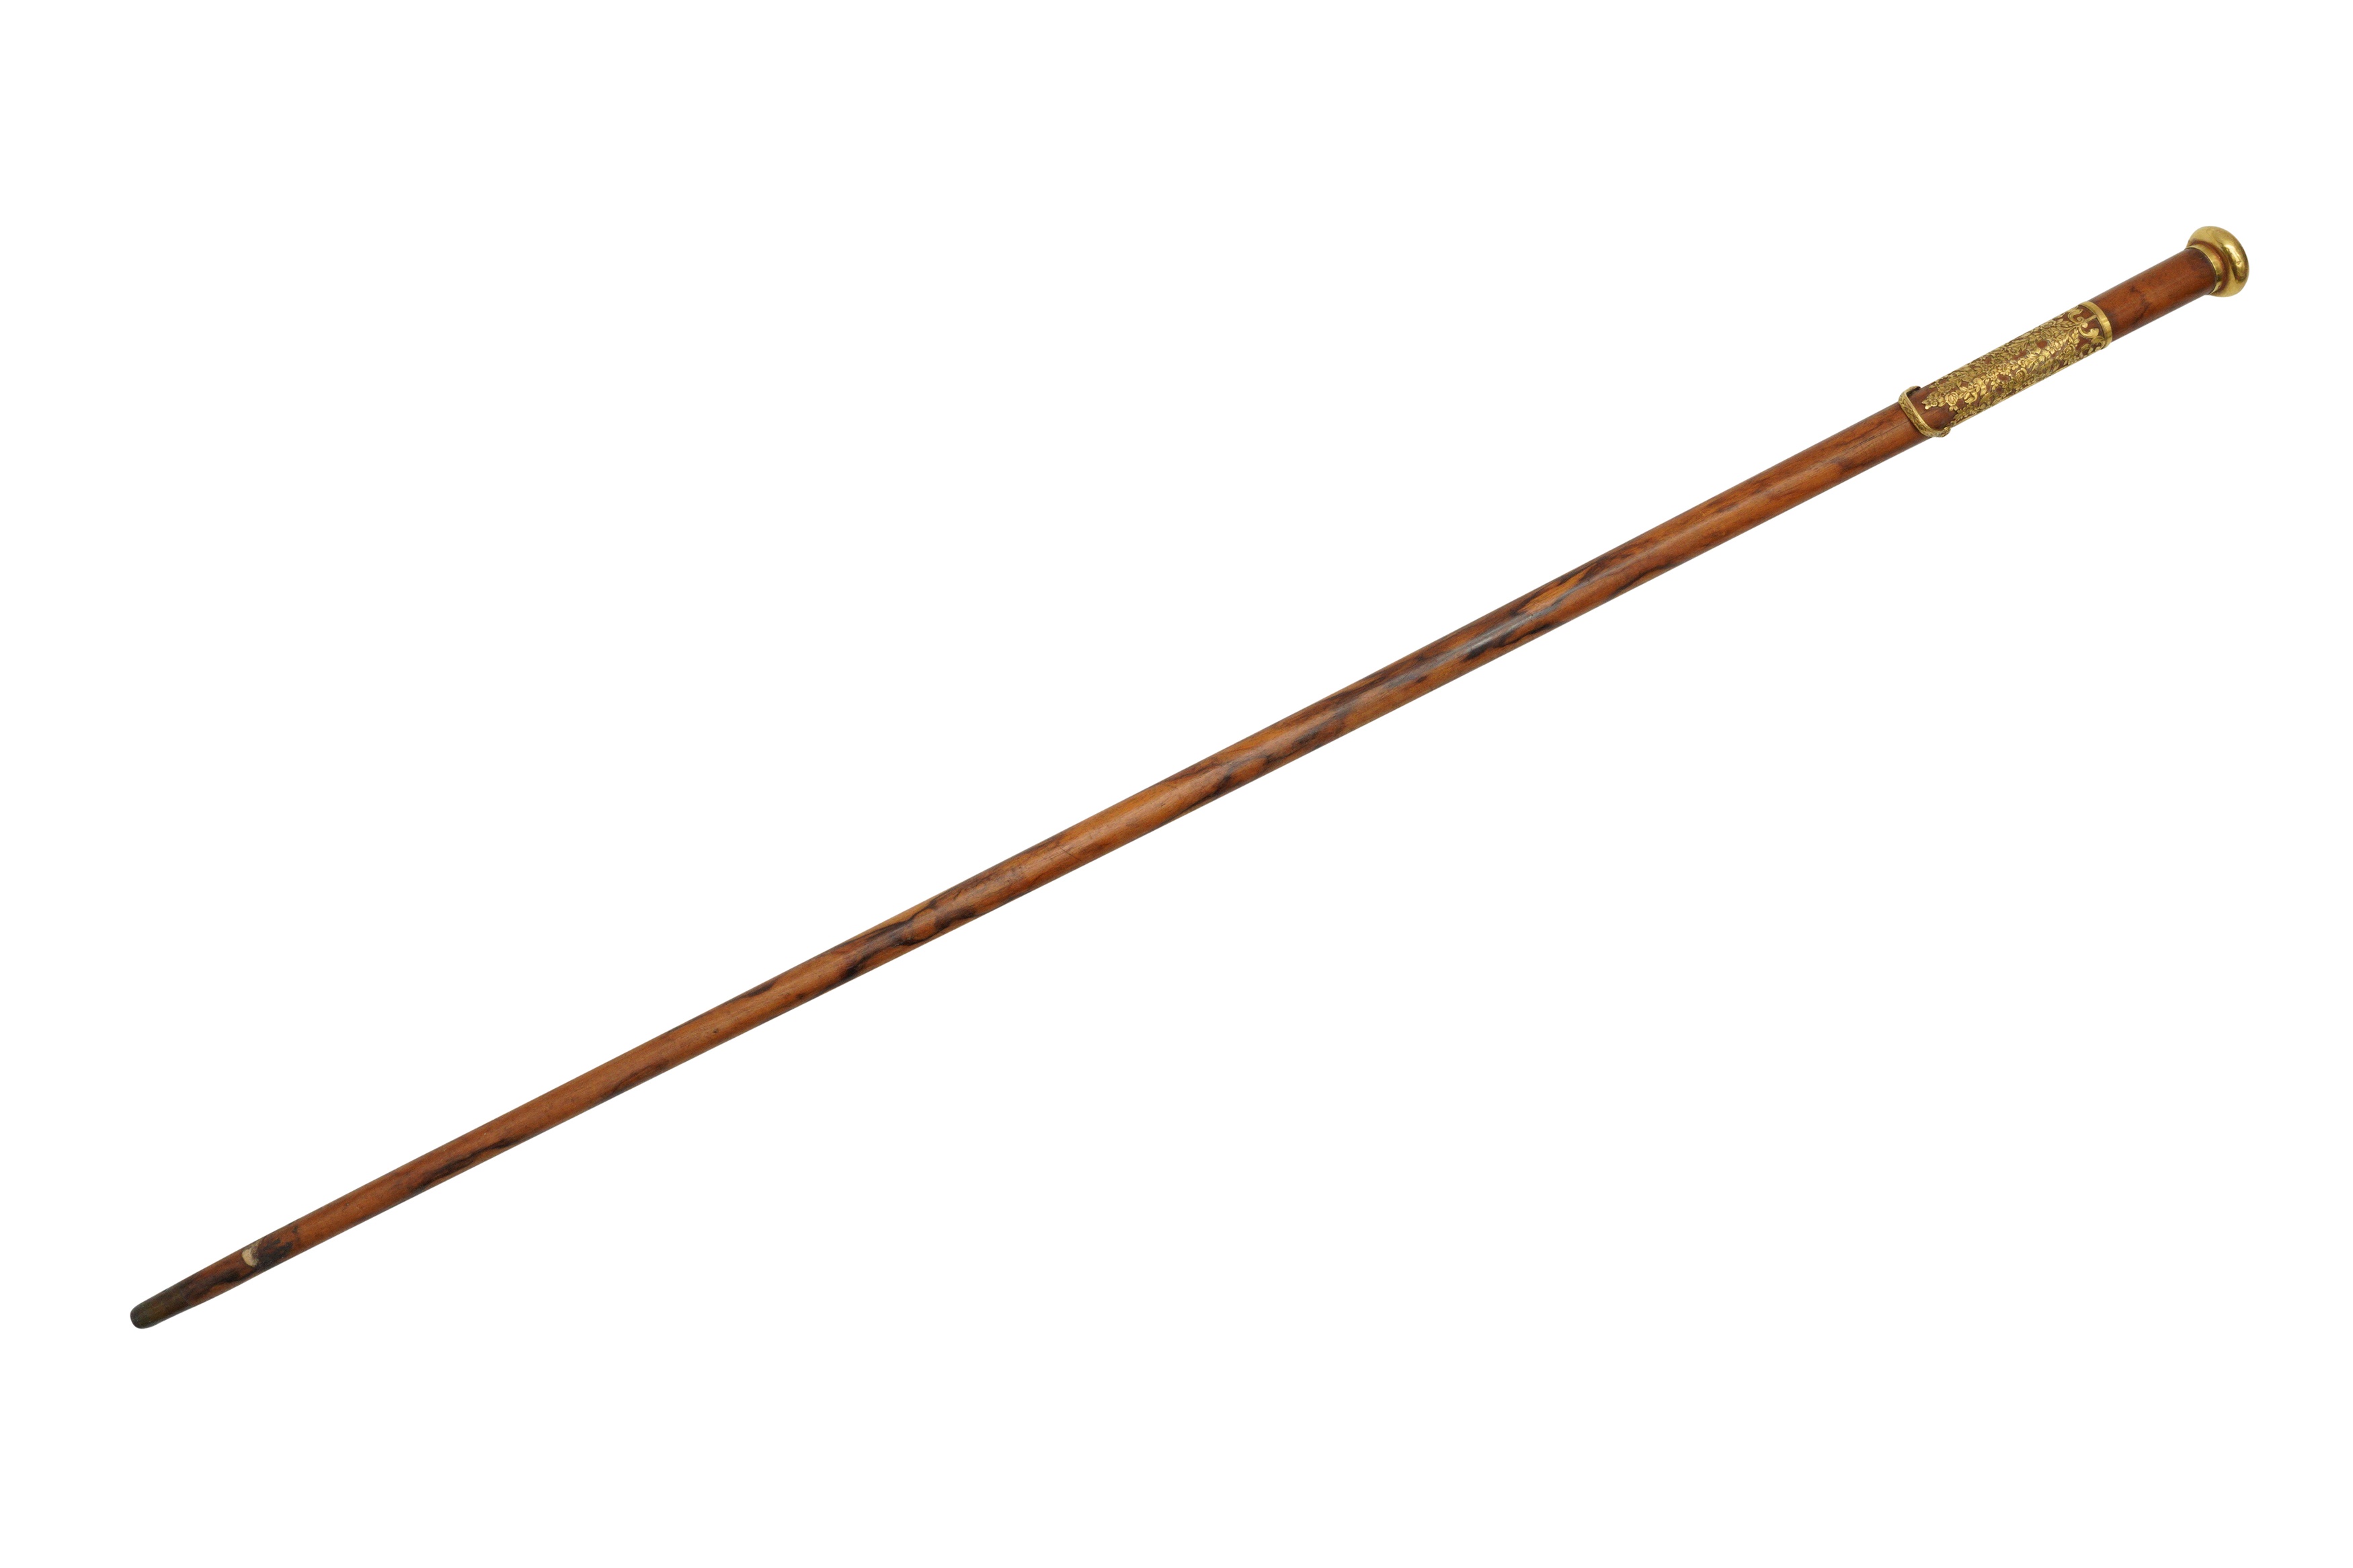 A 19TH CENTURY GOLD MOUNTED CANE - Image 3 of 3